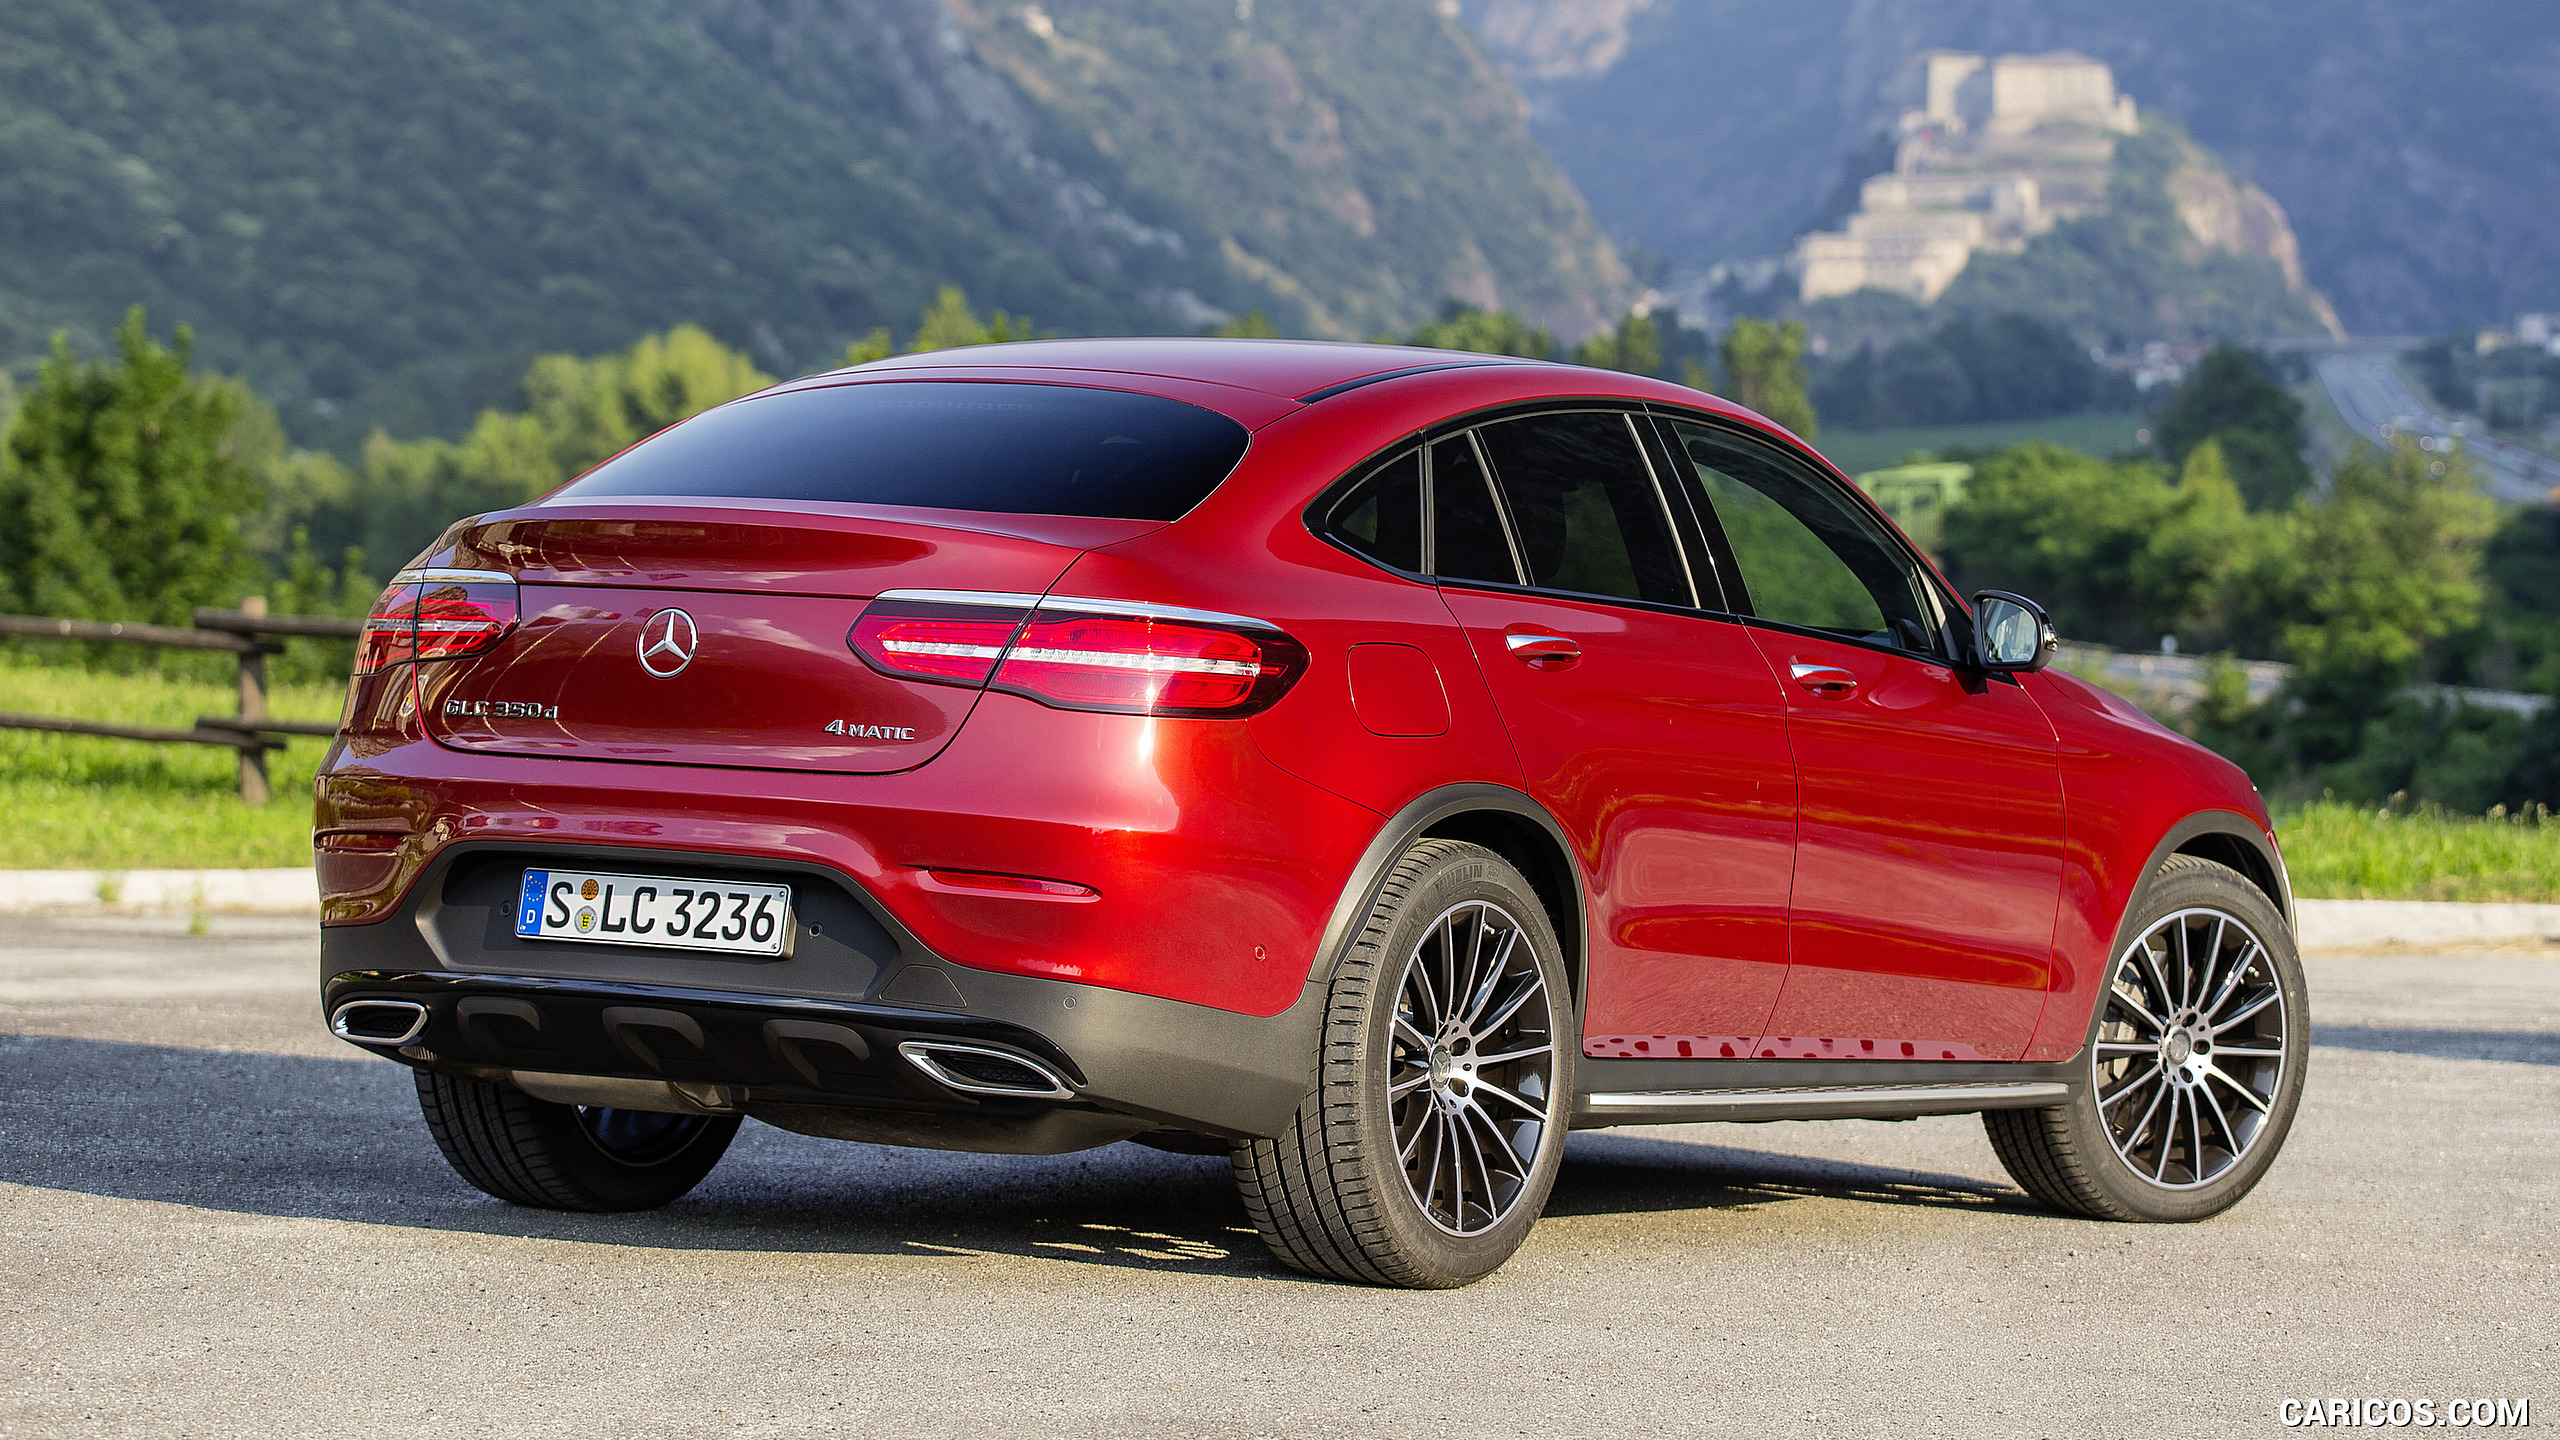 2017 Mercedes-Benz GLC 350 d Coupe (Diesel; Color: Hyacinth Red) - Rear Three-Quarter, #69 of 144